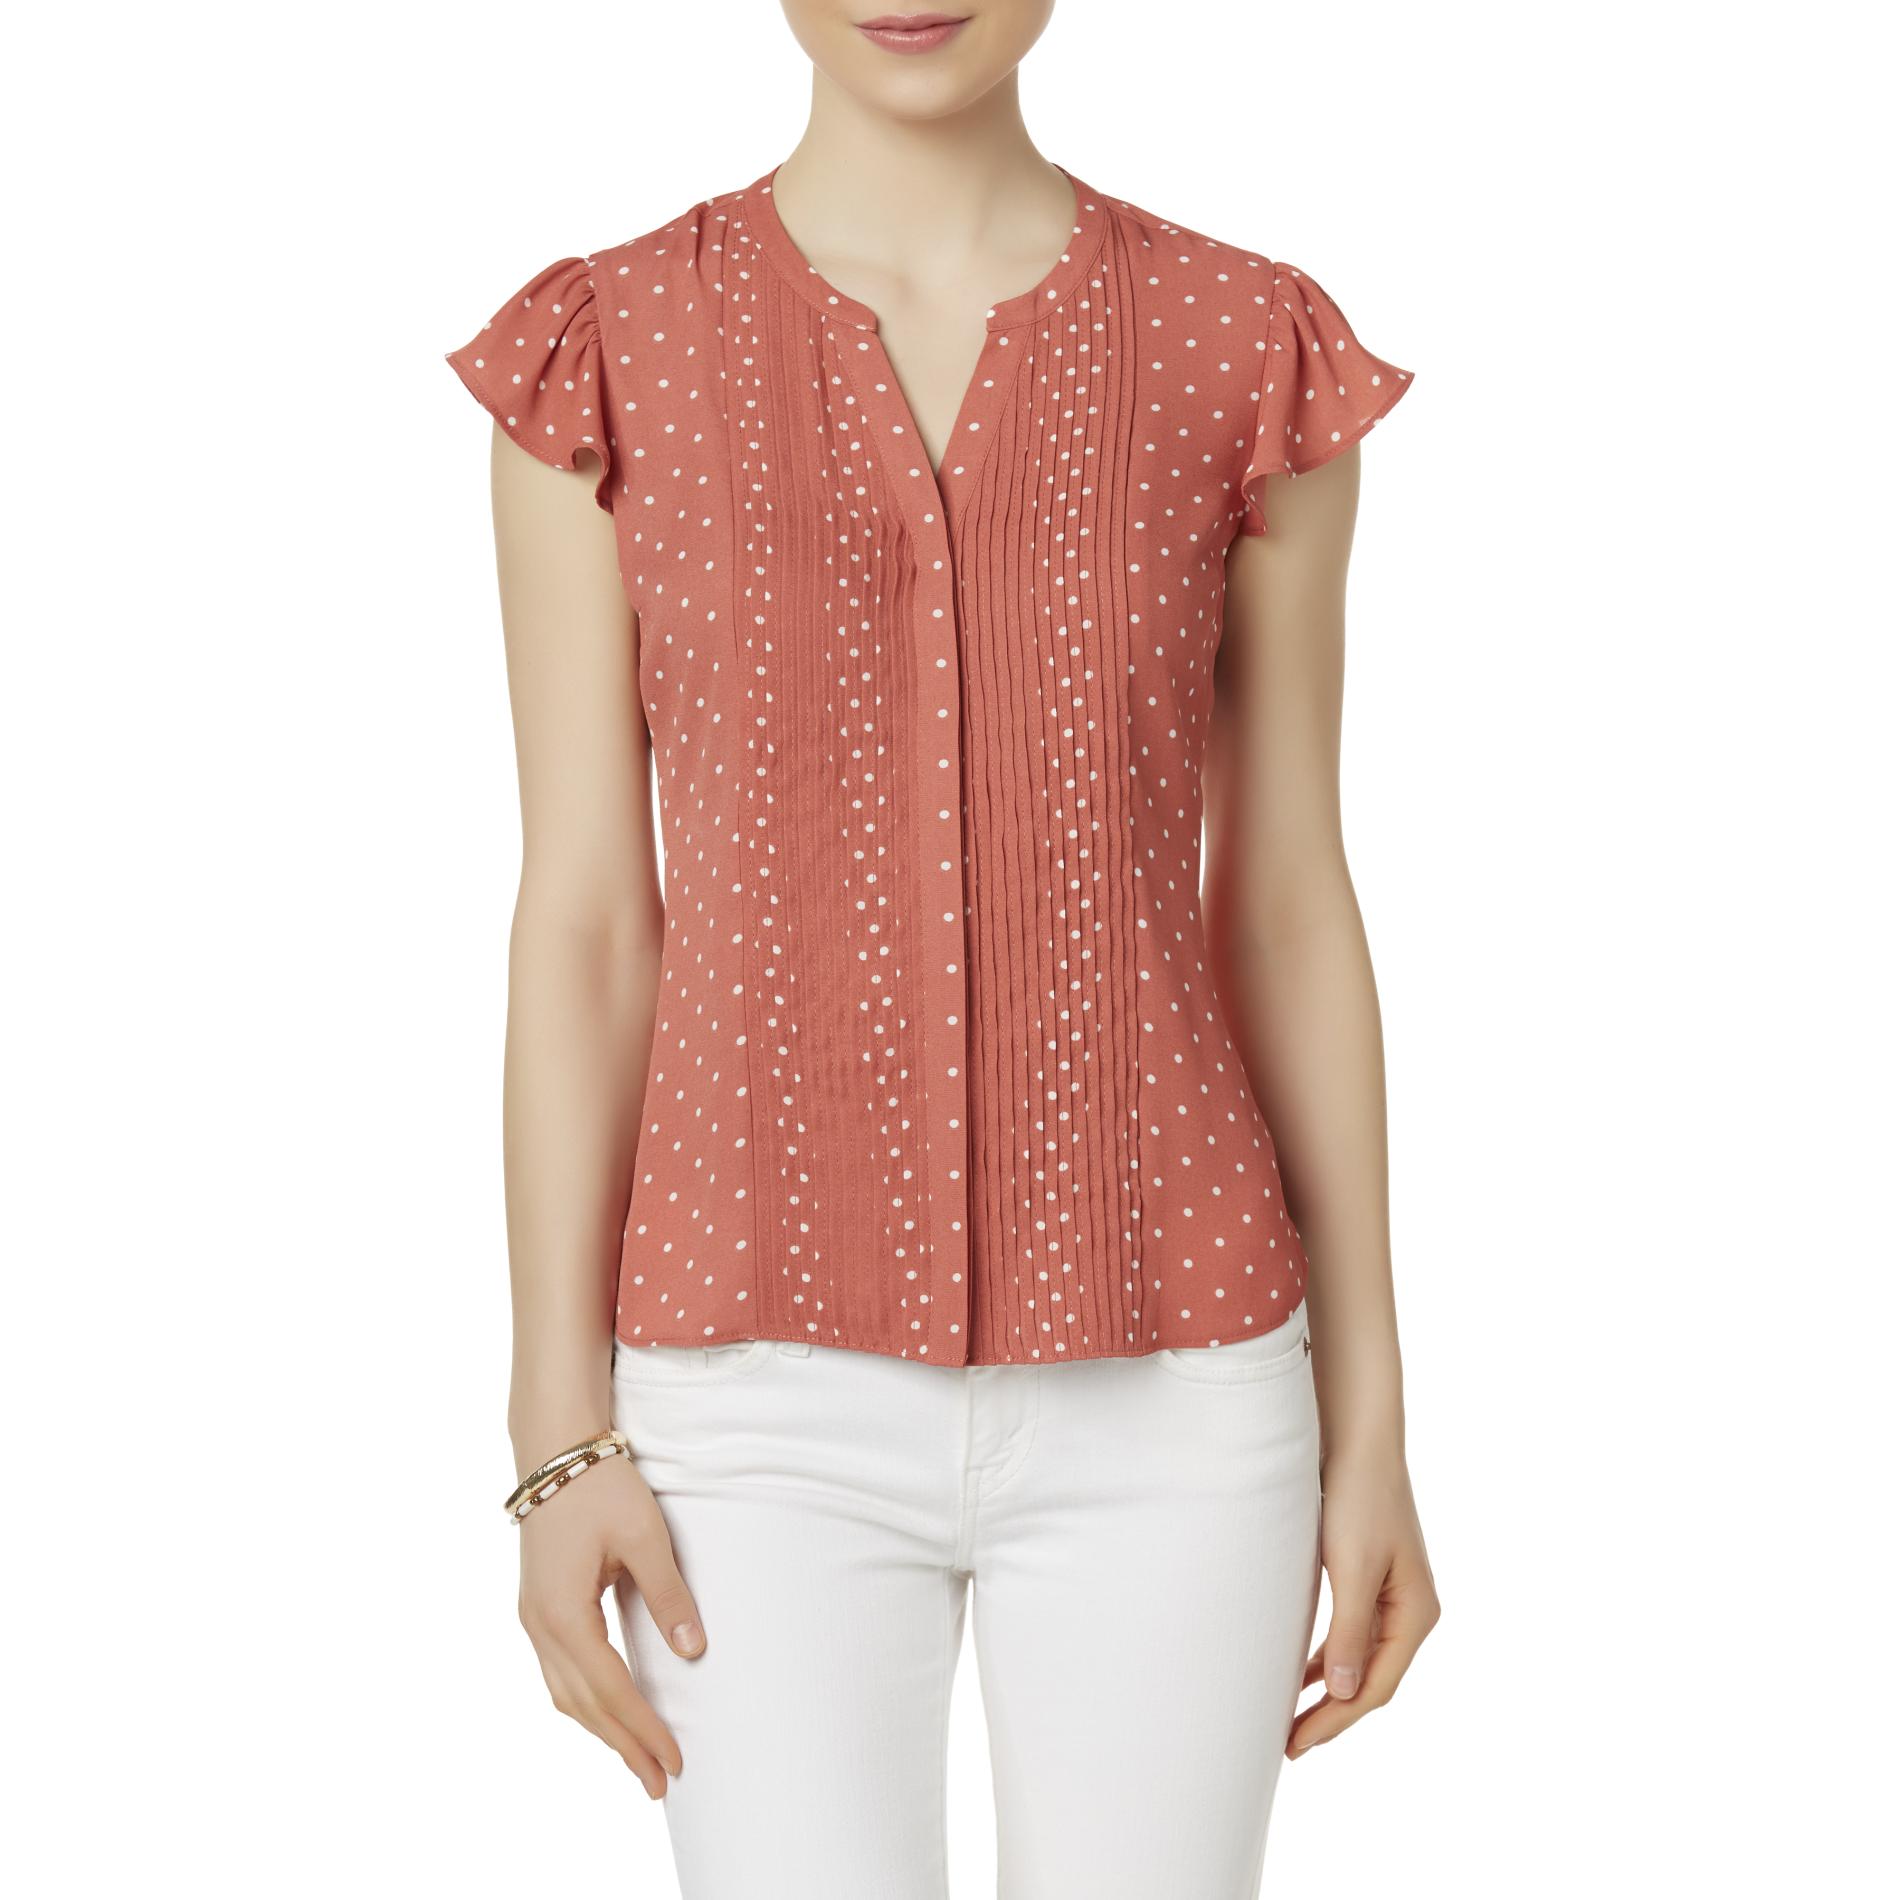 Simply Styled Petites' Pintucked Flutter Sleeve Blouse - Dots